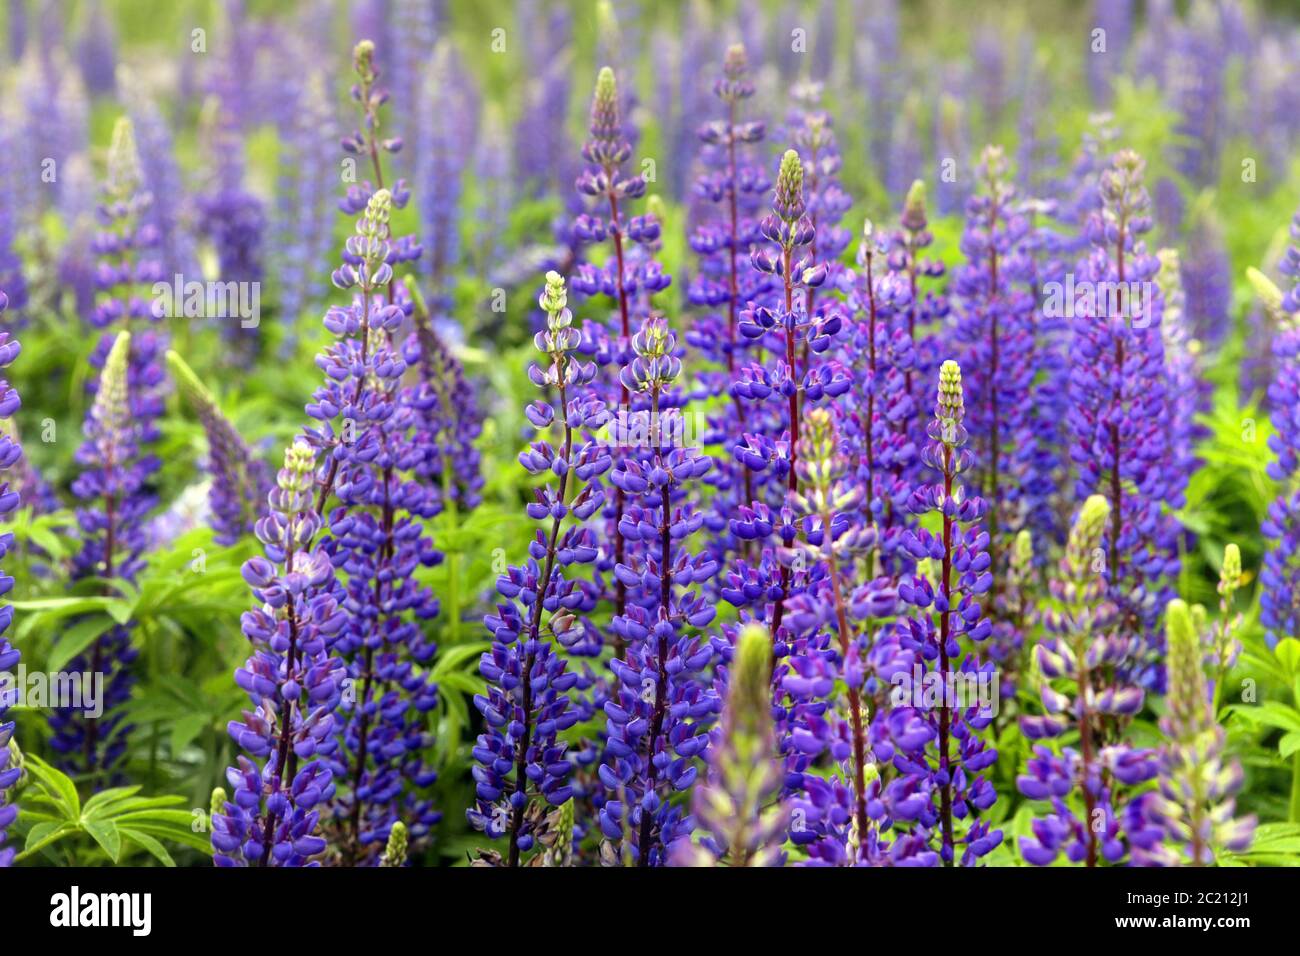 Lupinus field with blue flowers Stock Photo